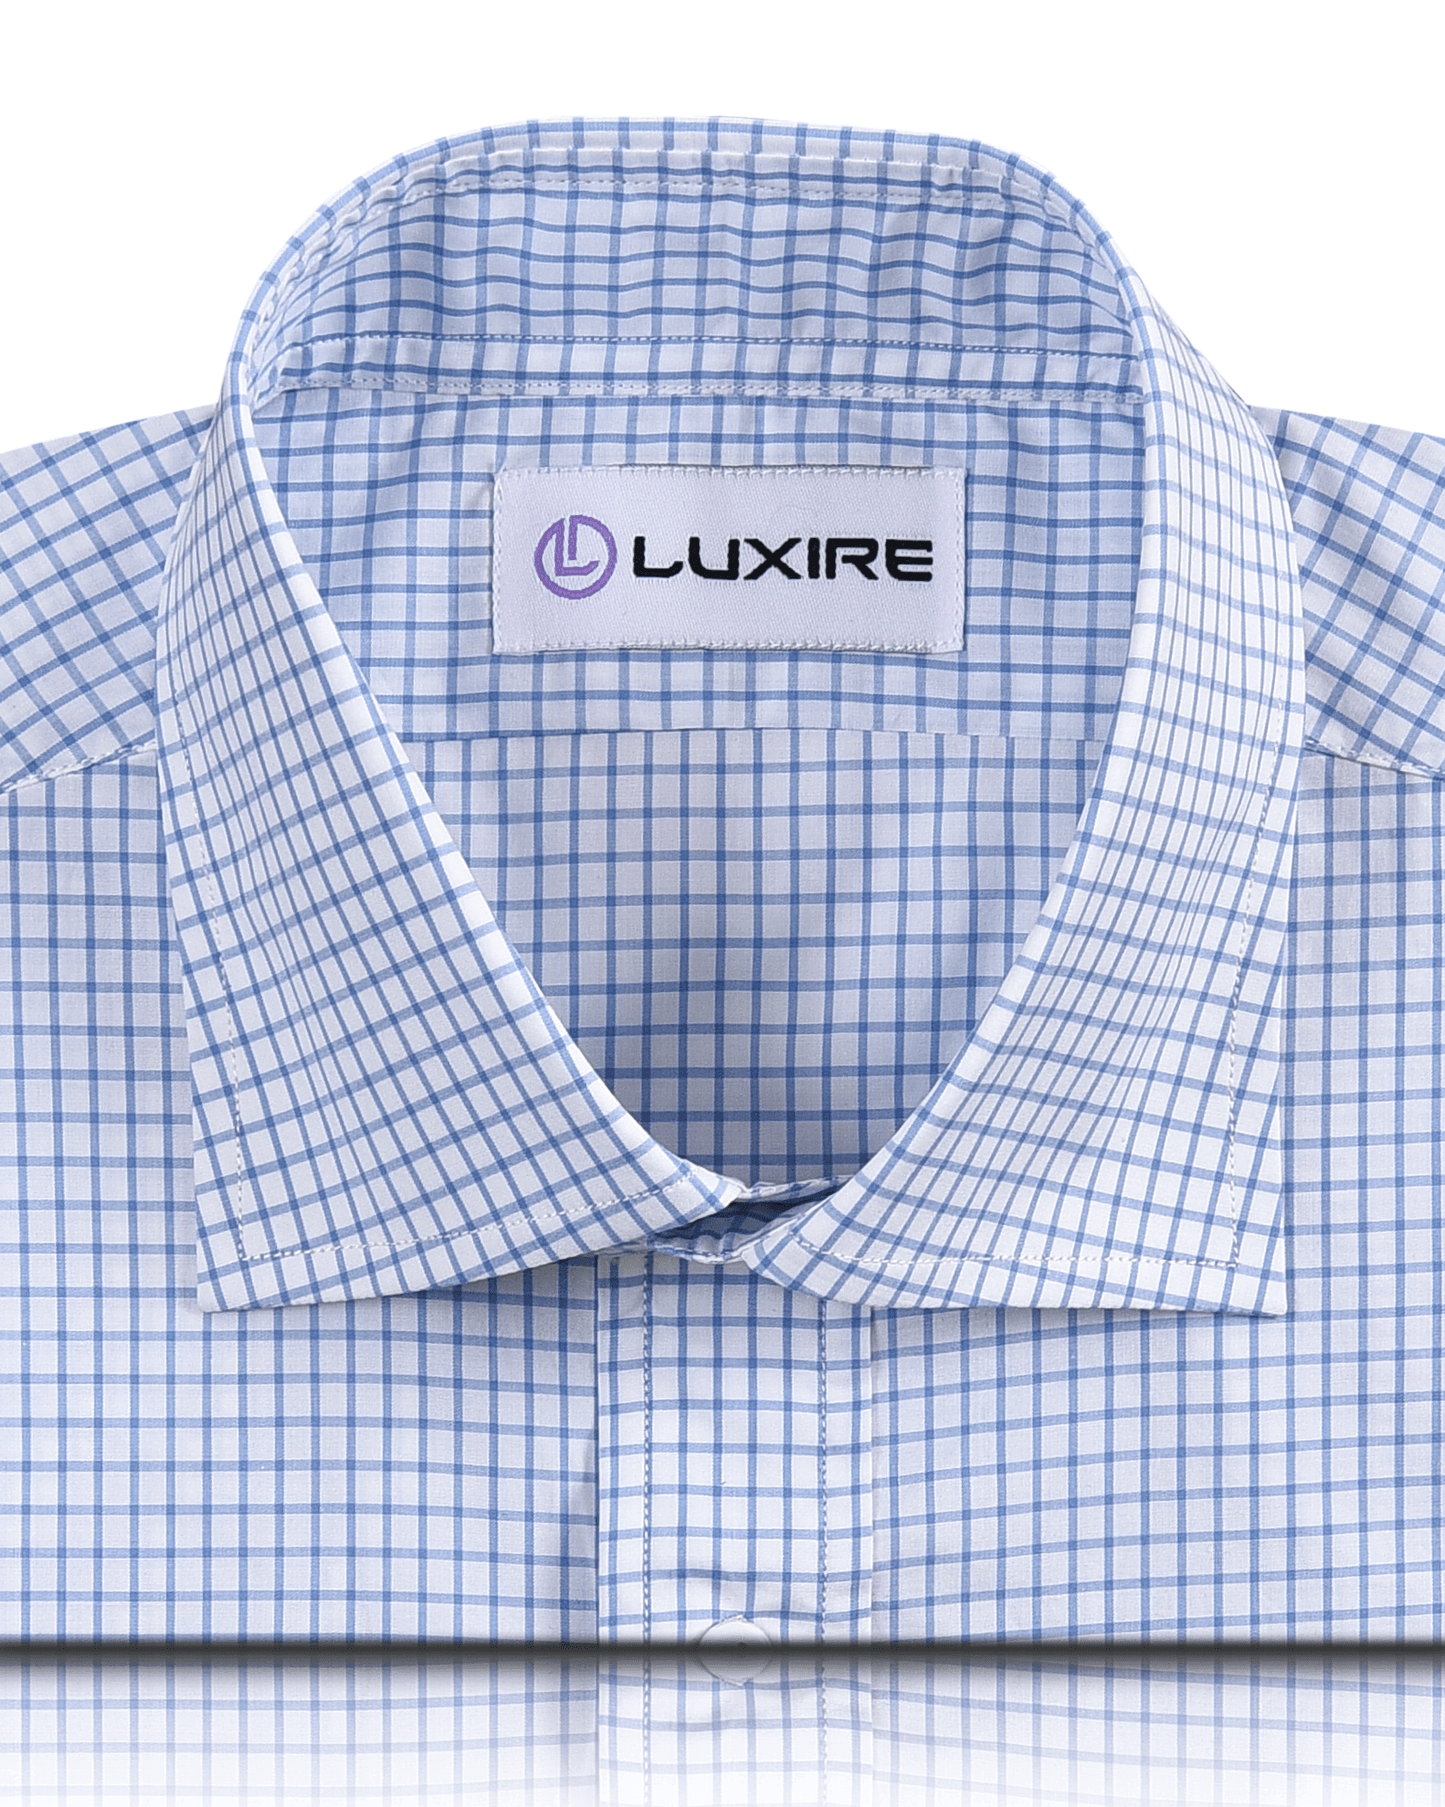 Front close view of custom check shirts for men by Luxire brembana sky blue